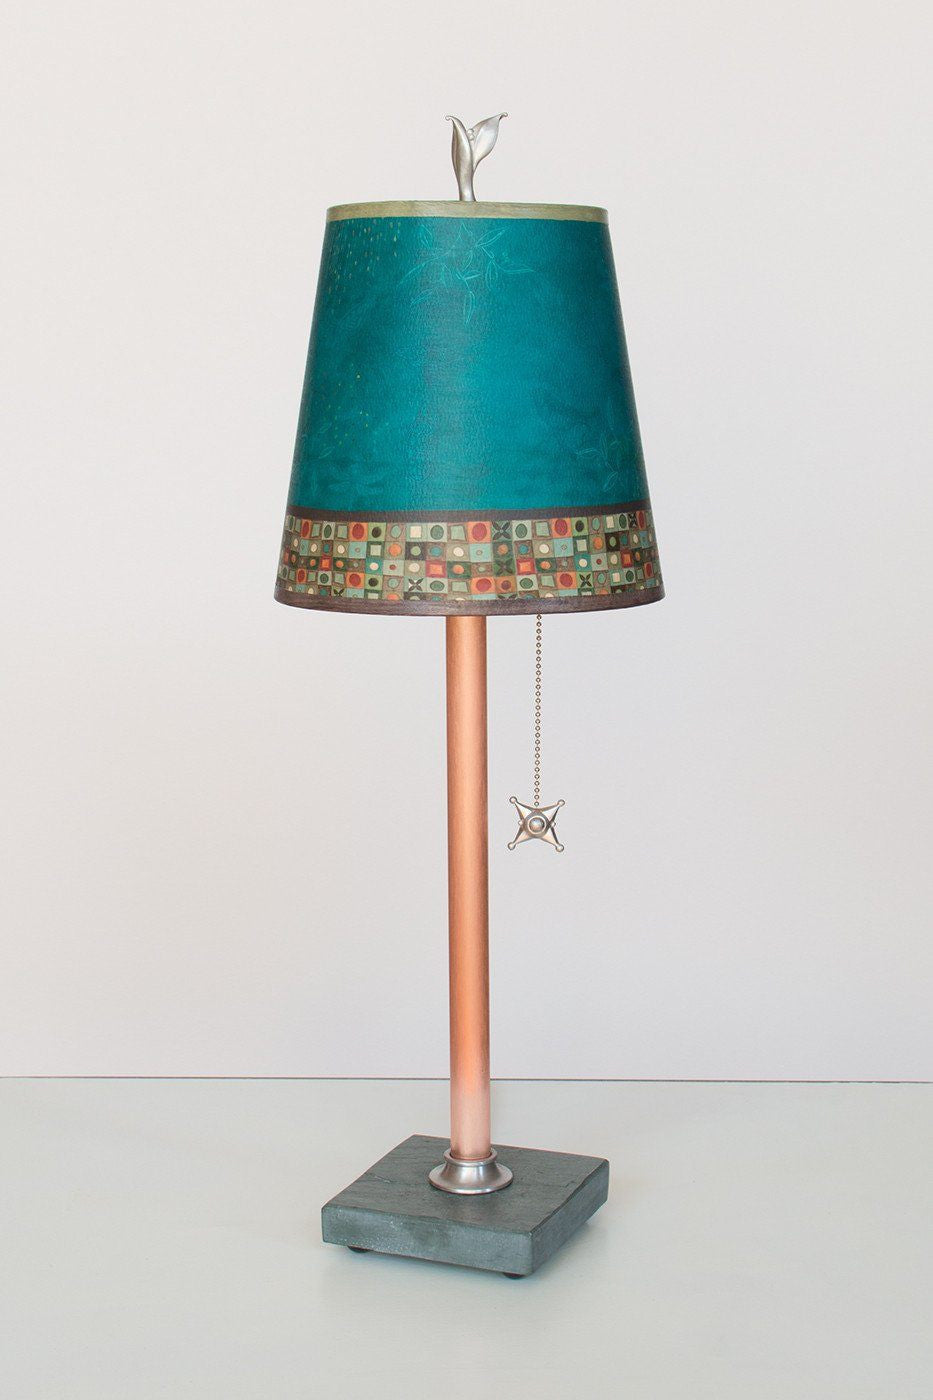 Janna Ugone & Co Table Lamps Copper Table Lamp with Small Drum Shade in Jade Mosaic